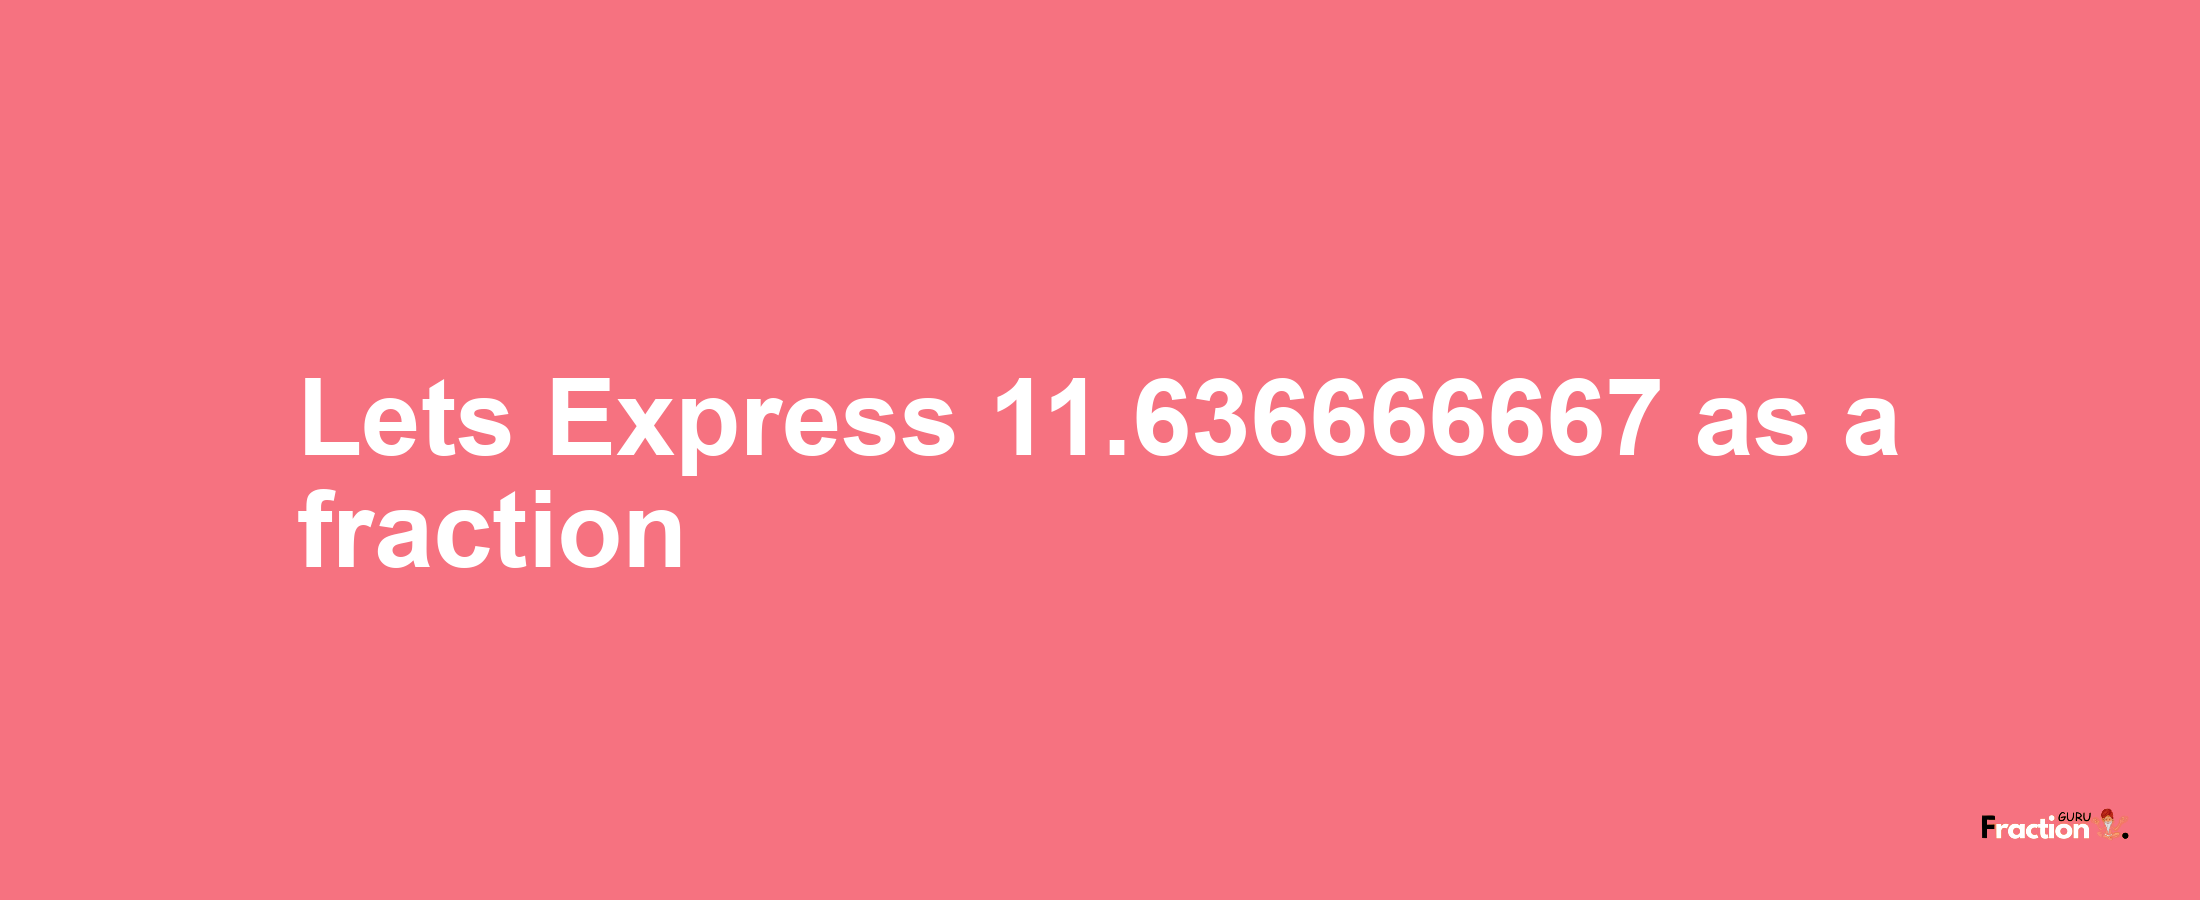 Lets Express 11.636666667 as afraction